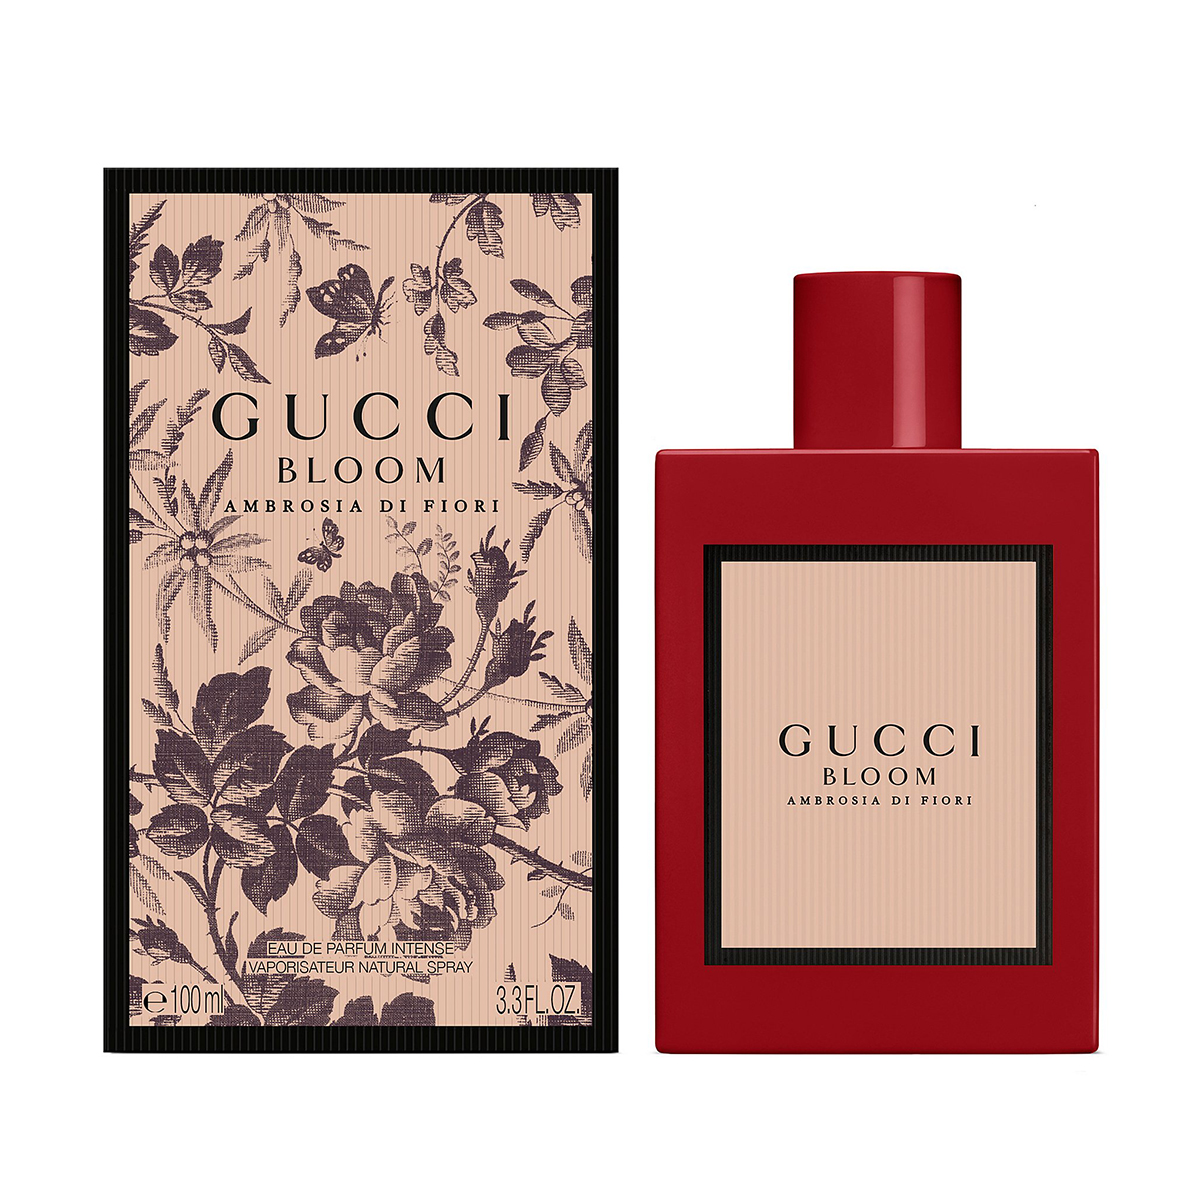 projektor Konklusion privilegeret FYI: These Are the 10 Best Gucci Perfumes Ever Made | Who What Wear